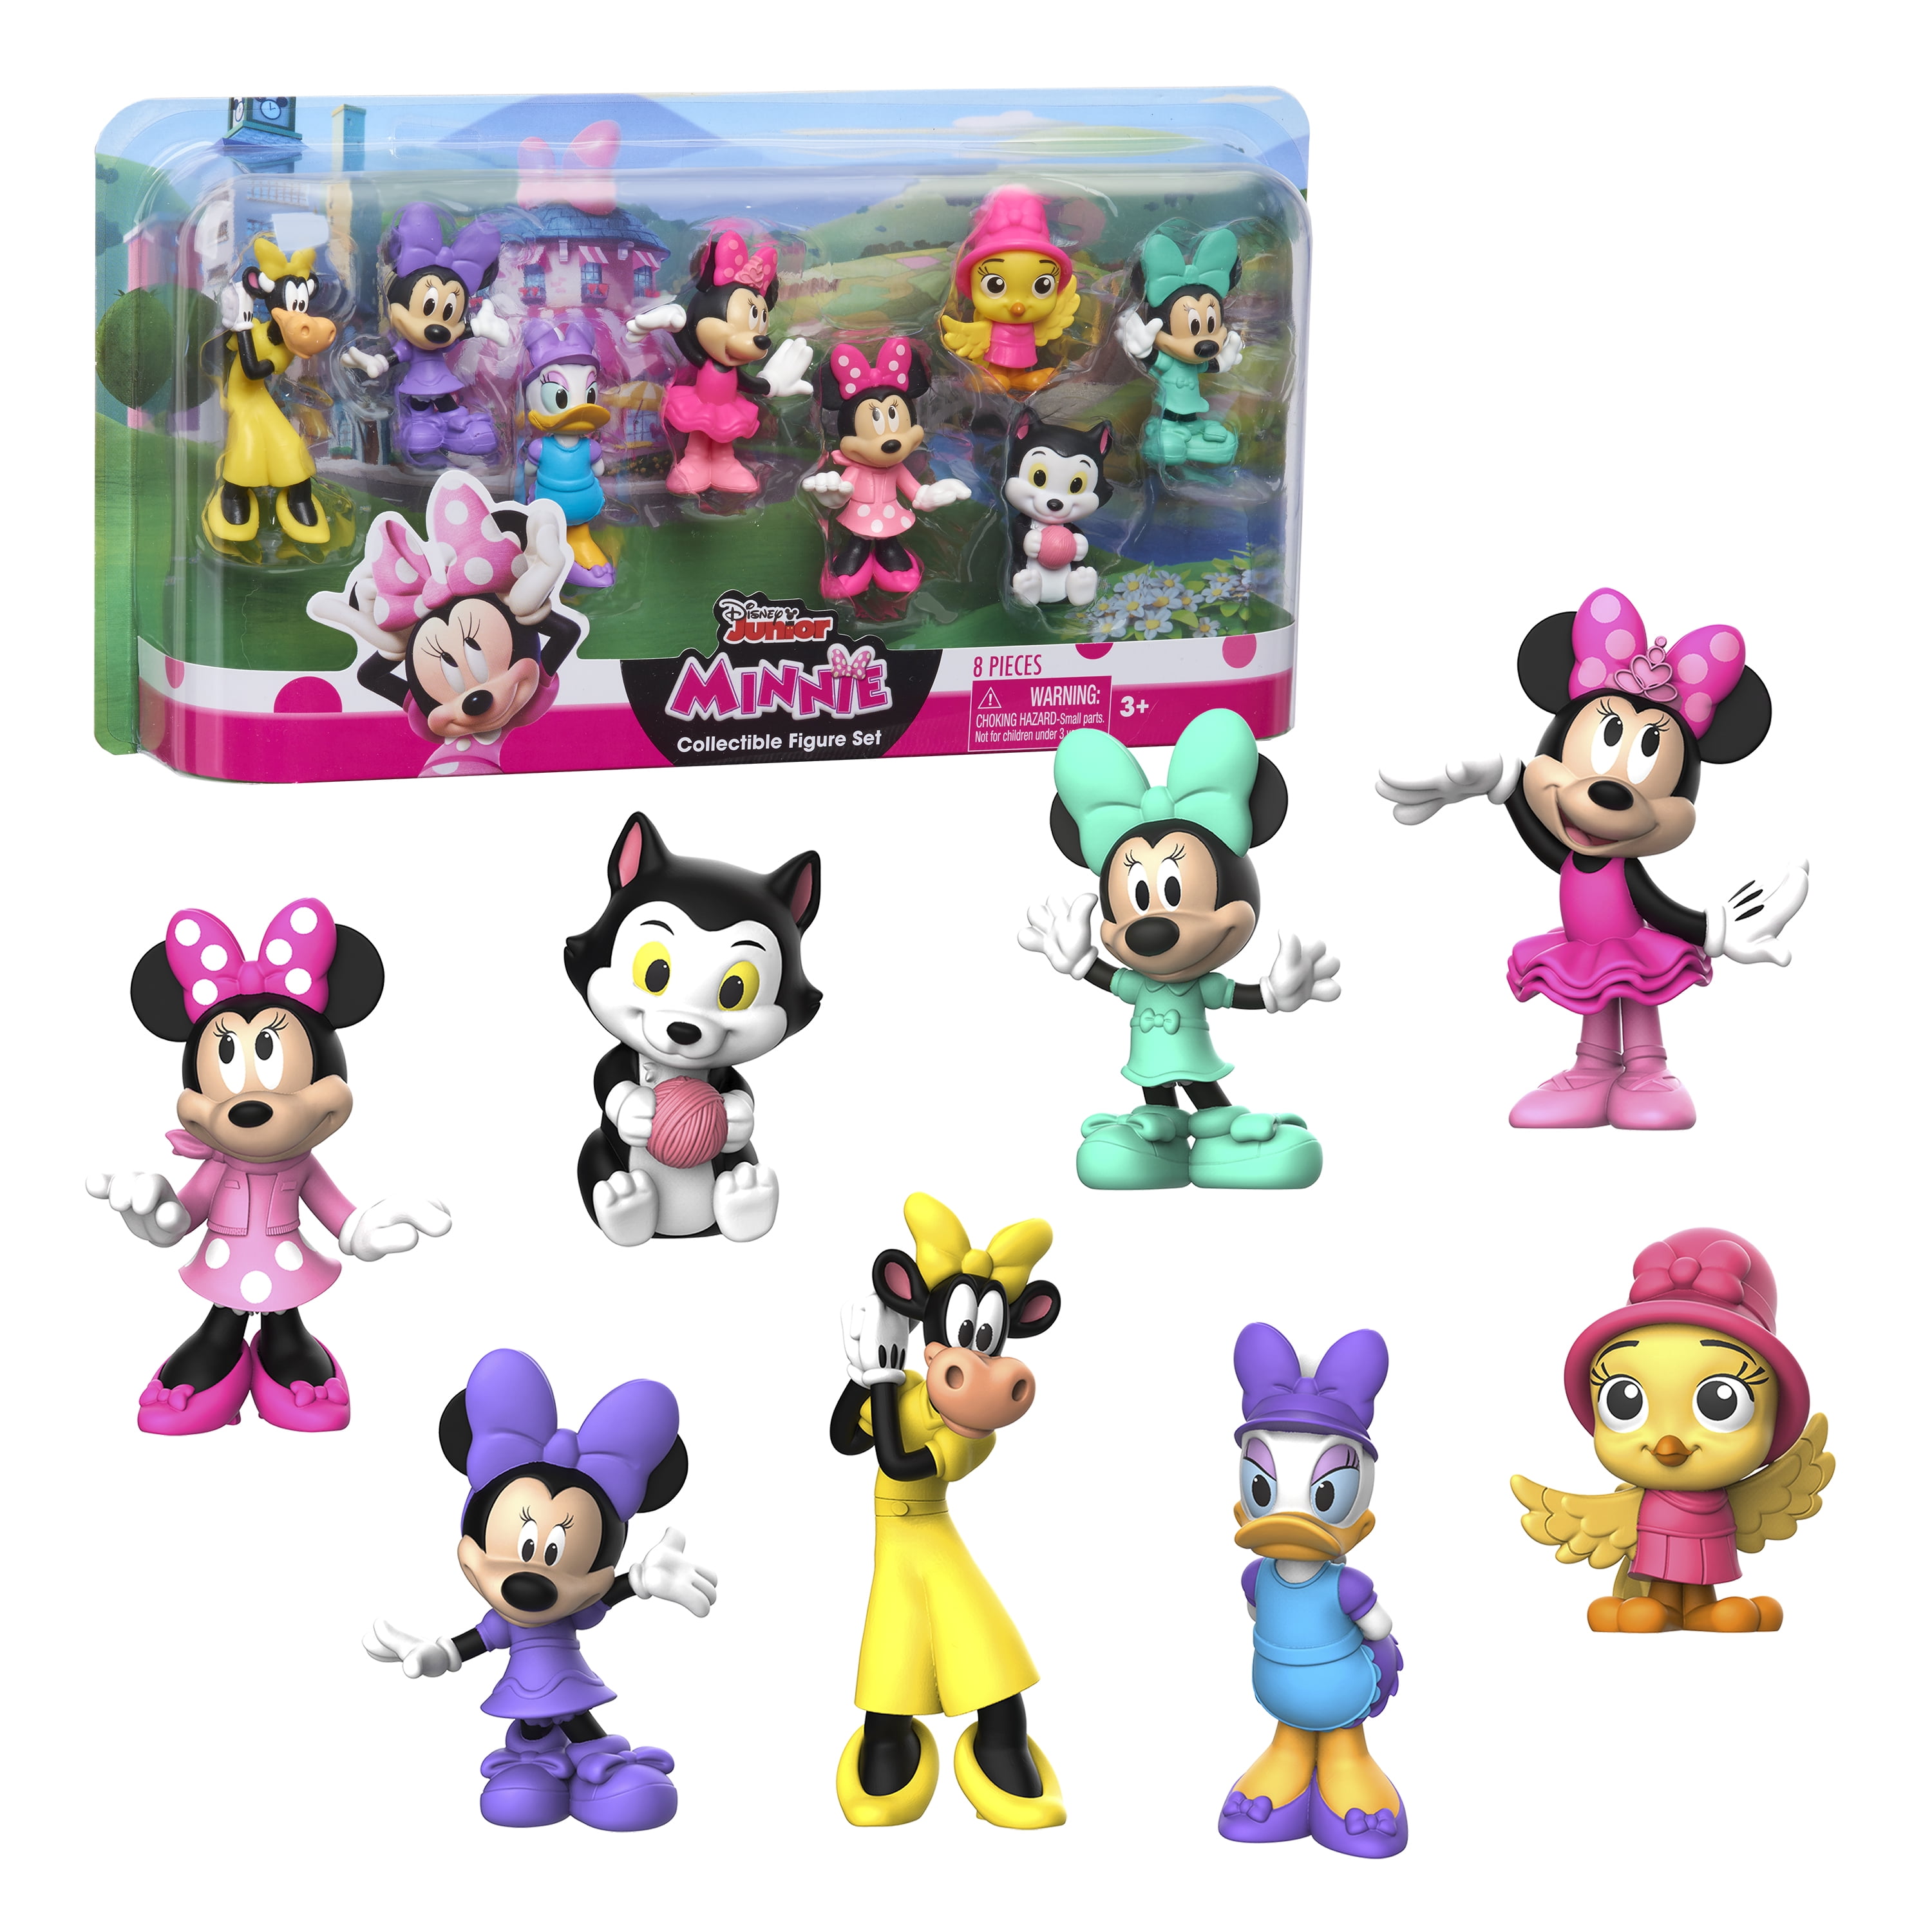 Disney Junior Characters NEW Minnie Mouse 8 Piece Collectible Figure Set